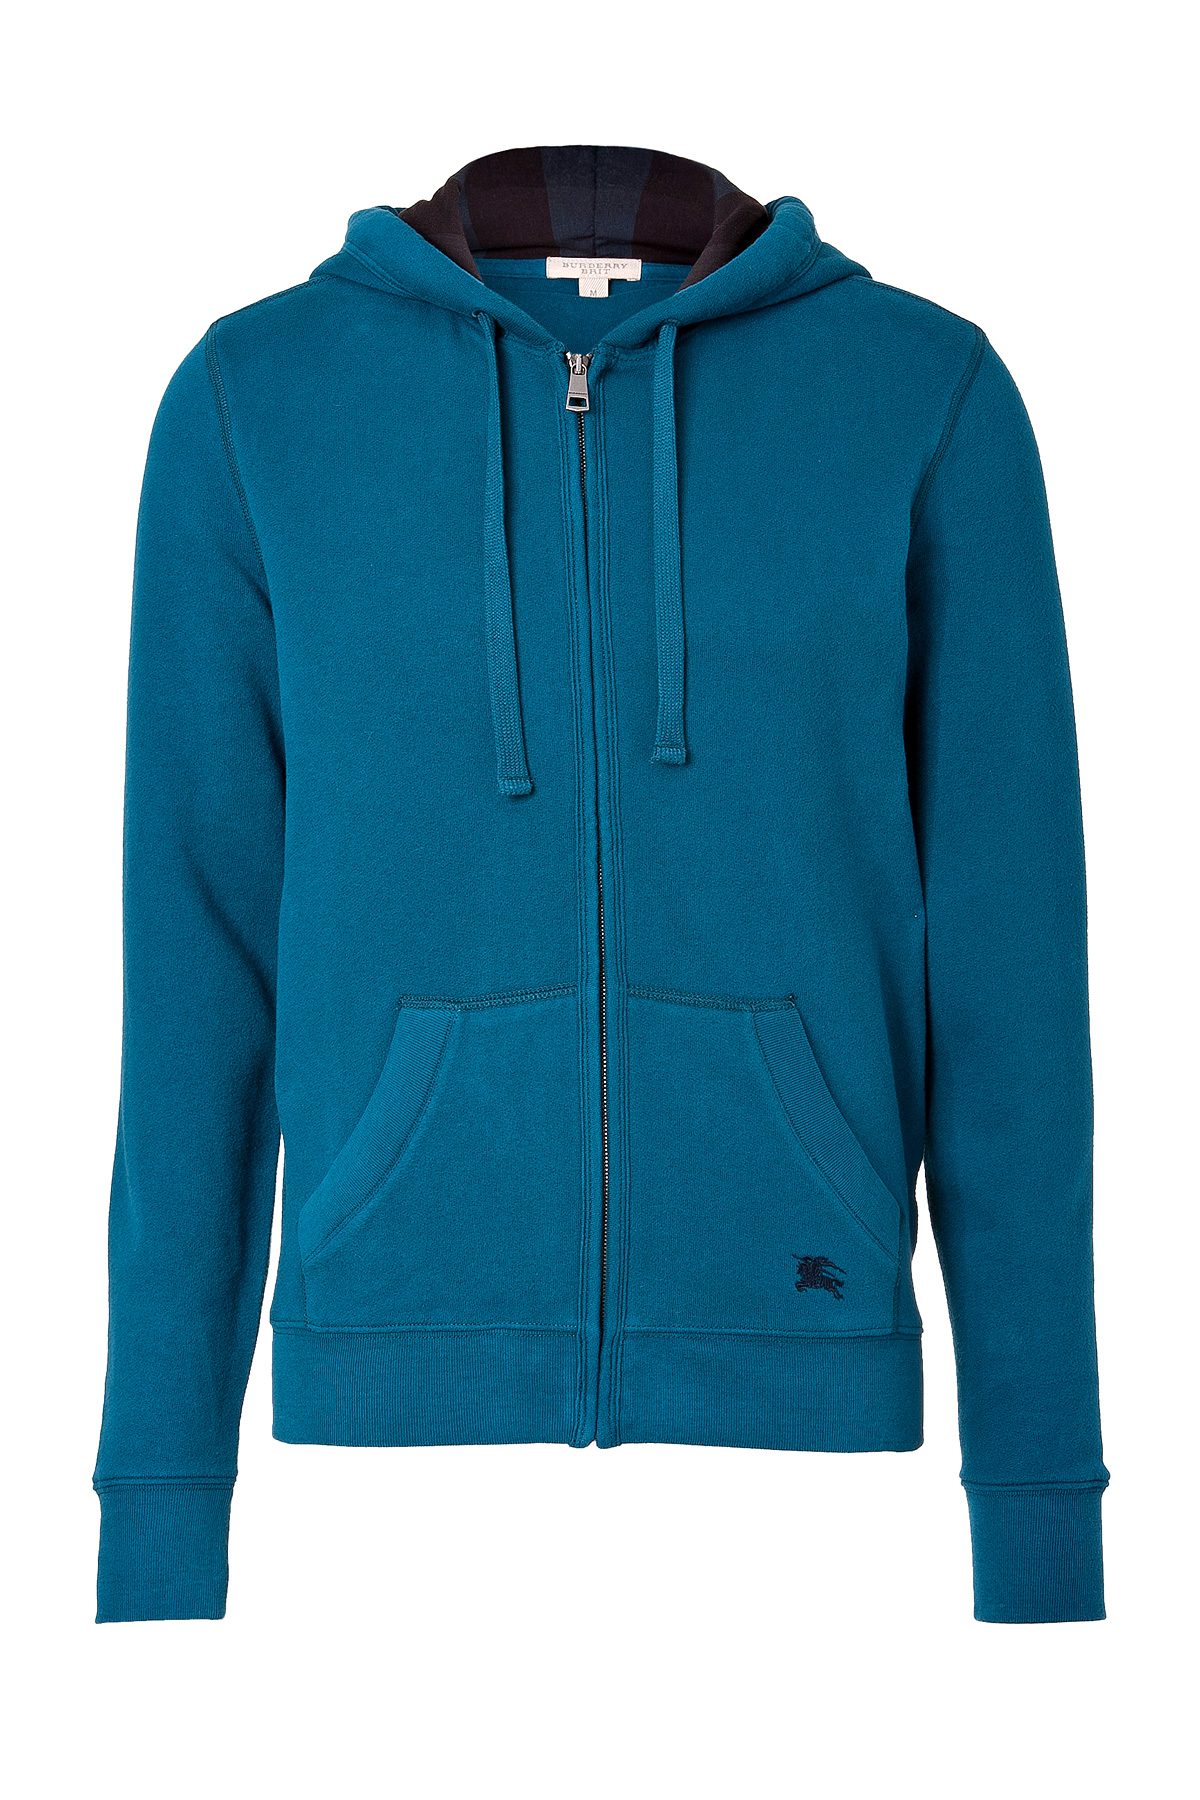 Burberry Brit Teal Blue Chester Hoodie in Blue for Men (teal) | Lyst